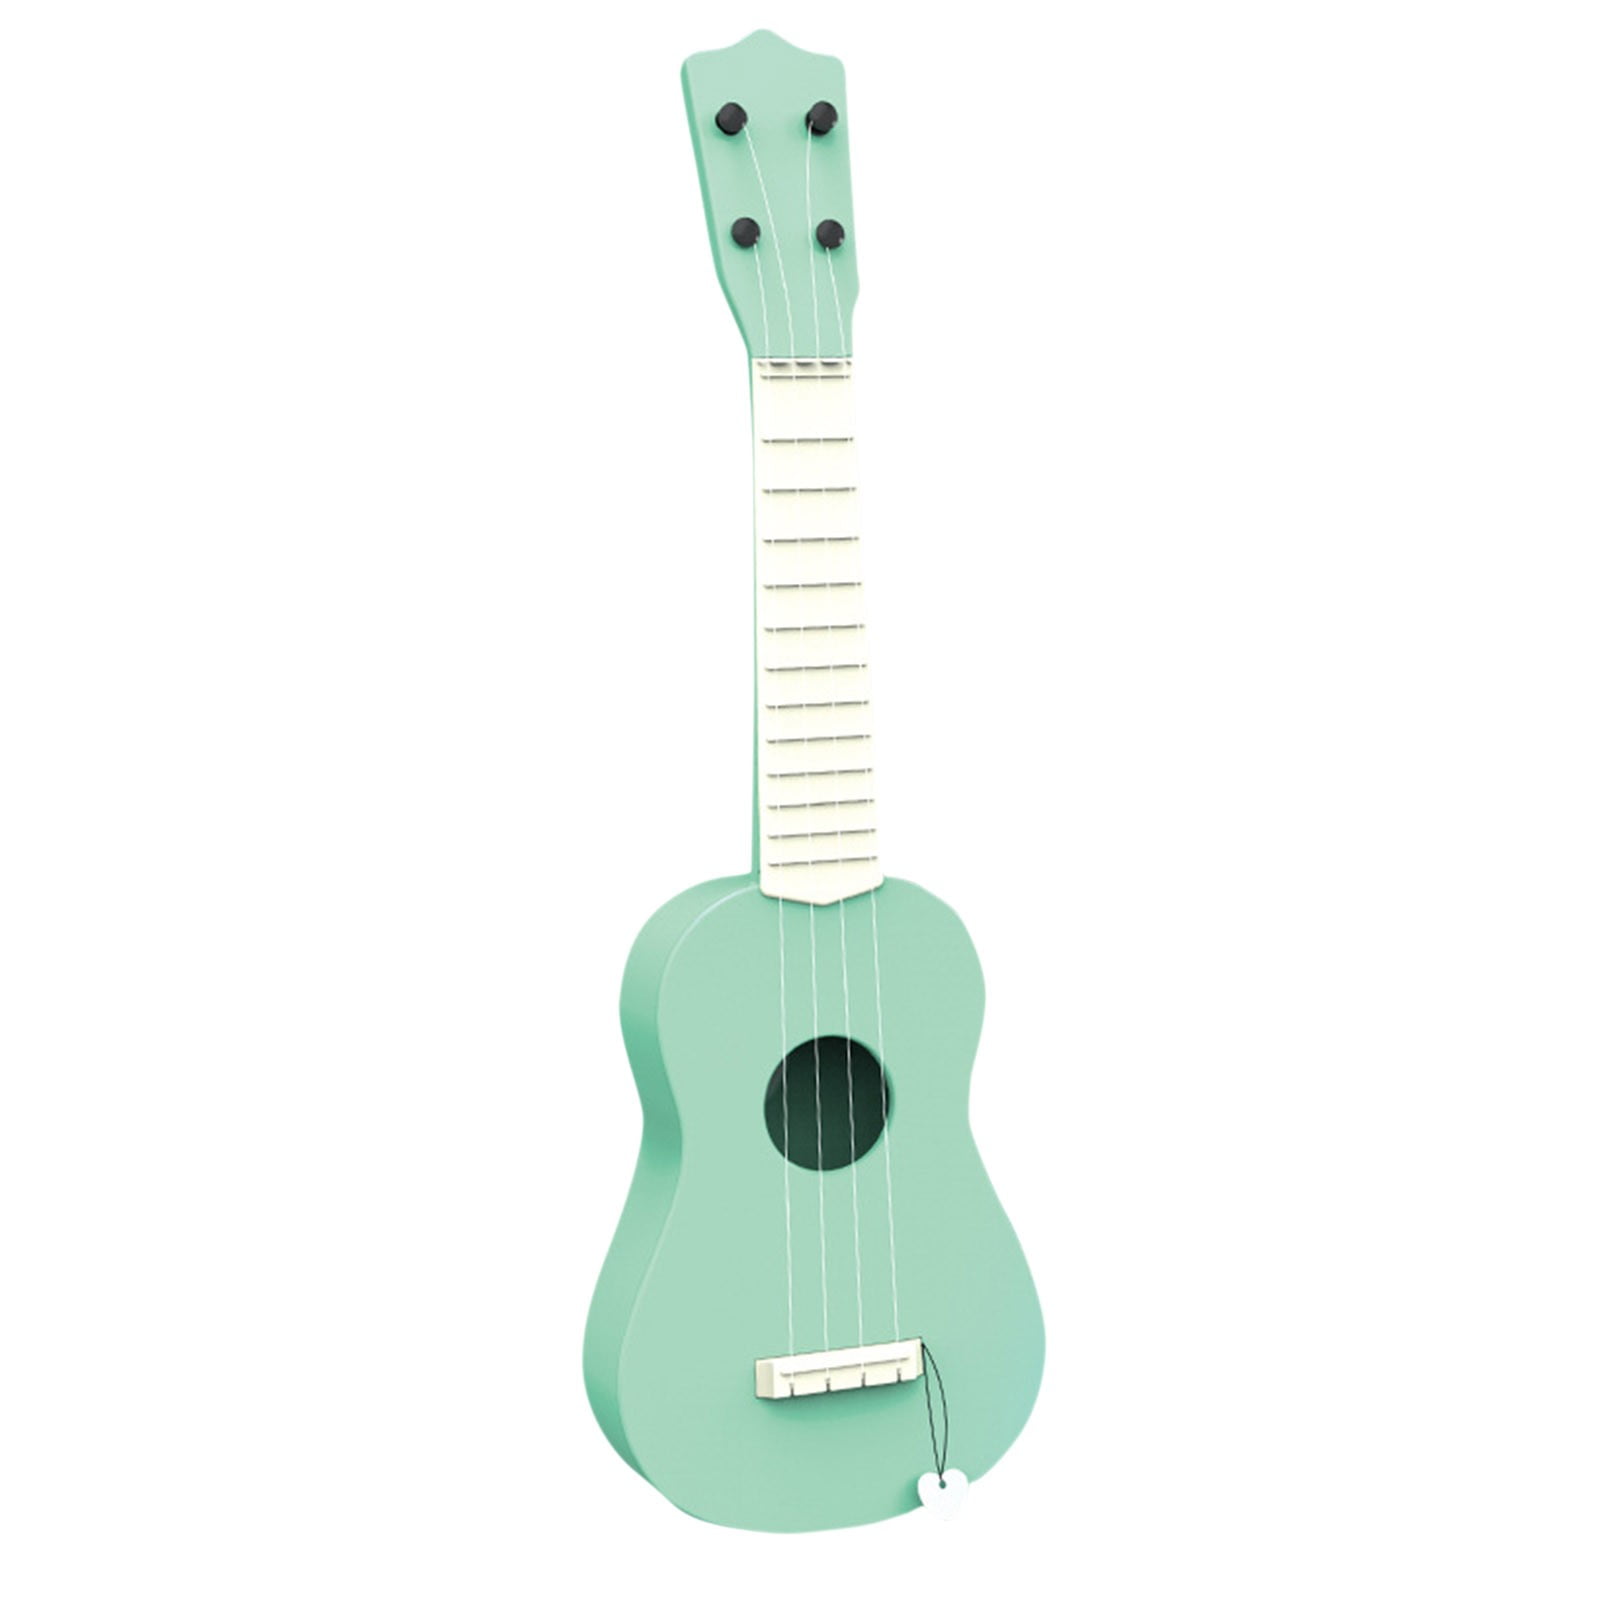 Green+red Creative Children Learn Guitar Ukulele Mini Fruit Can Play Musical Instruments Toys Toy Guitar